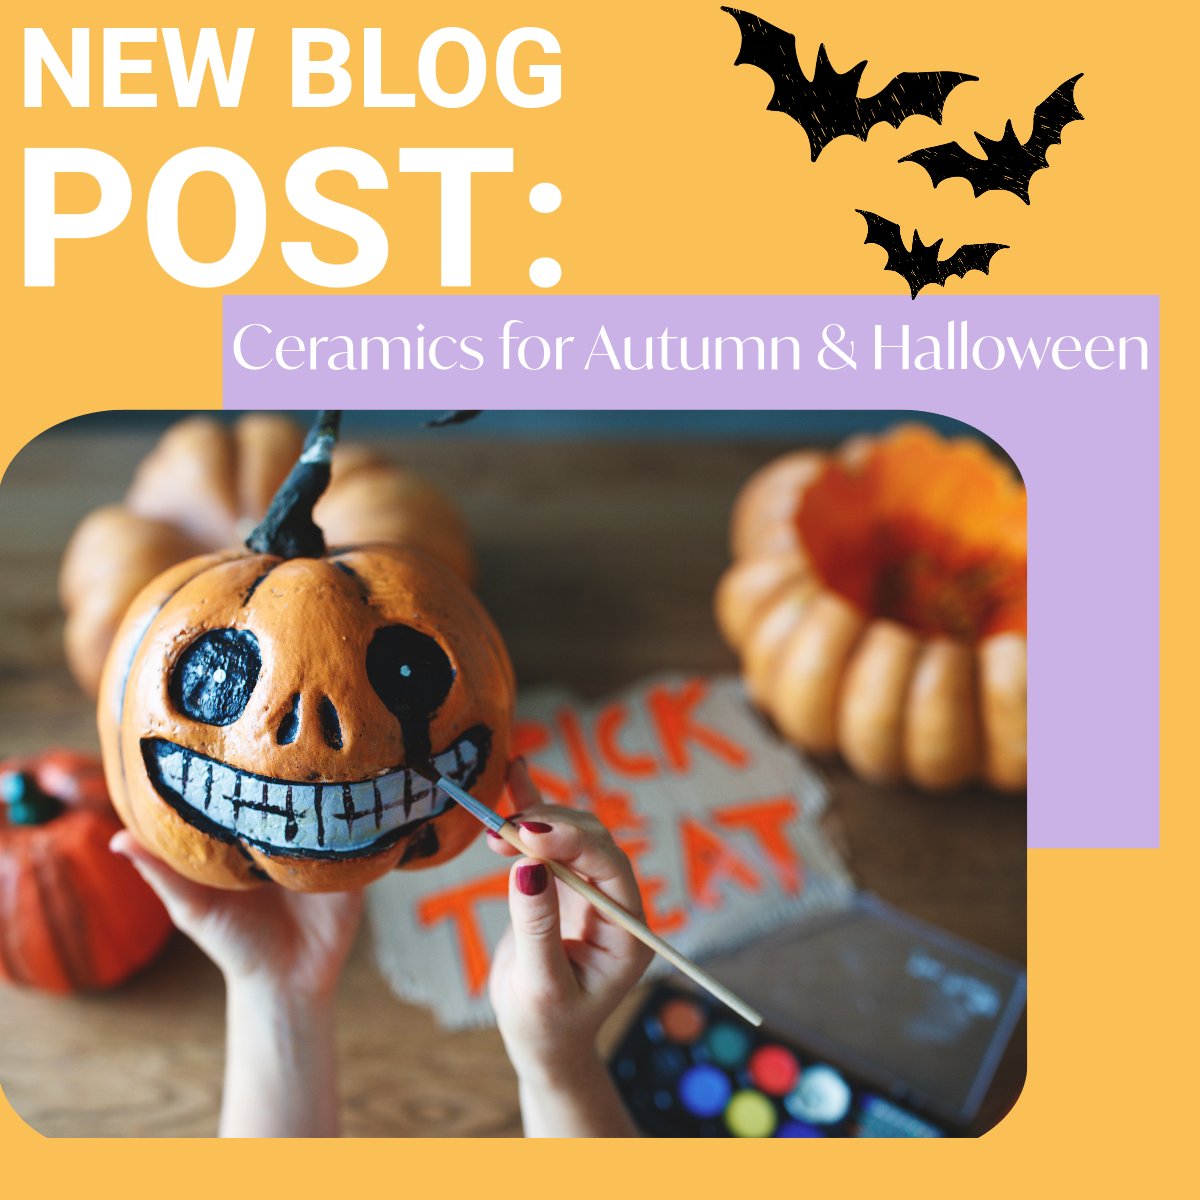 New Blog Post! Discover the ceramic goodies in this years new autumn & Halloween collection 🍄🦉🐺🎃
Click below to read:
artypax.com/post/autumn-ha…

Have a crafty Halloween everyone 😃

#HalloweenCrafts #HalloweenDecor #AutumnDecor #AutumnStyle #PaintYourOwn #PotteryPainting